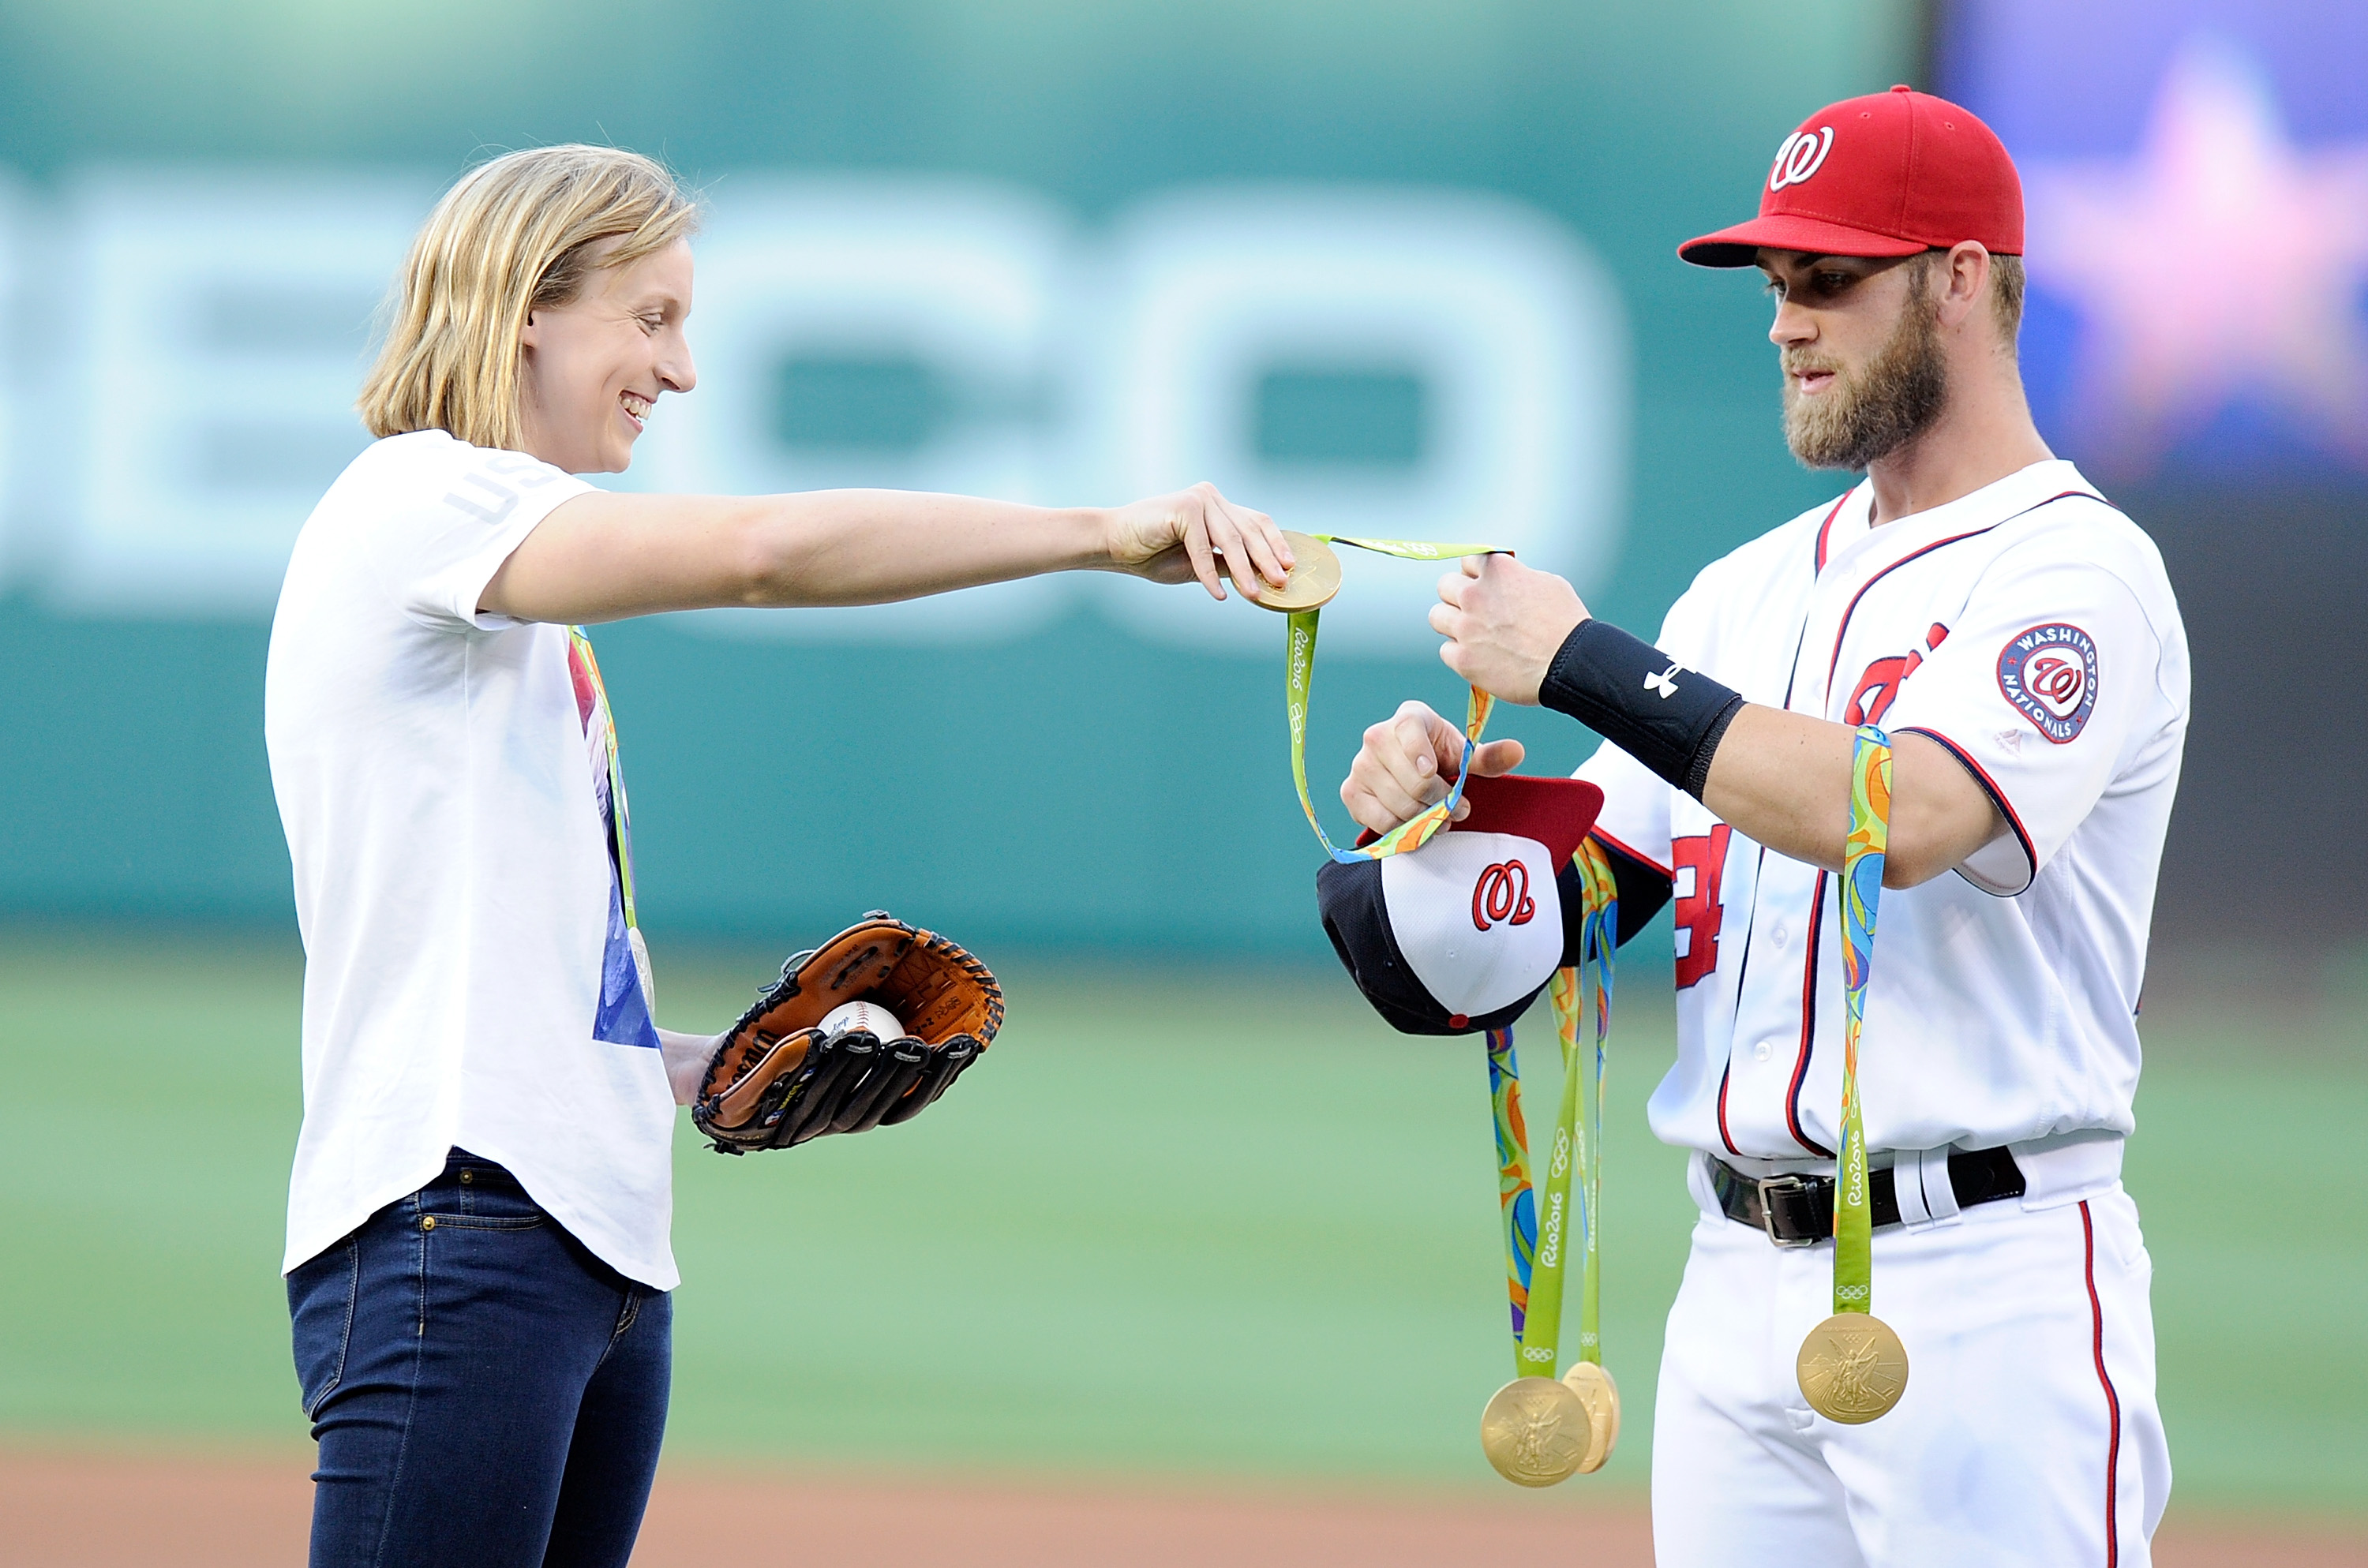 Katie Ledecky hands her Olympic medals to Bryce Harper before throwing out the opening pitch at Nationals Park on Aug. 24, 2016 in Washington, DC. (Greg Fiume—Getty Images)